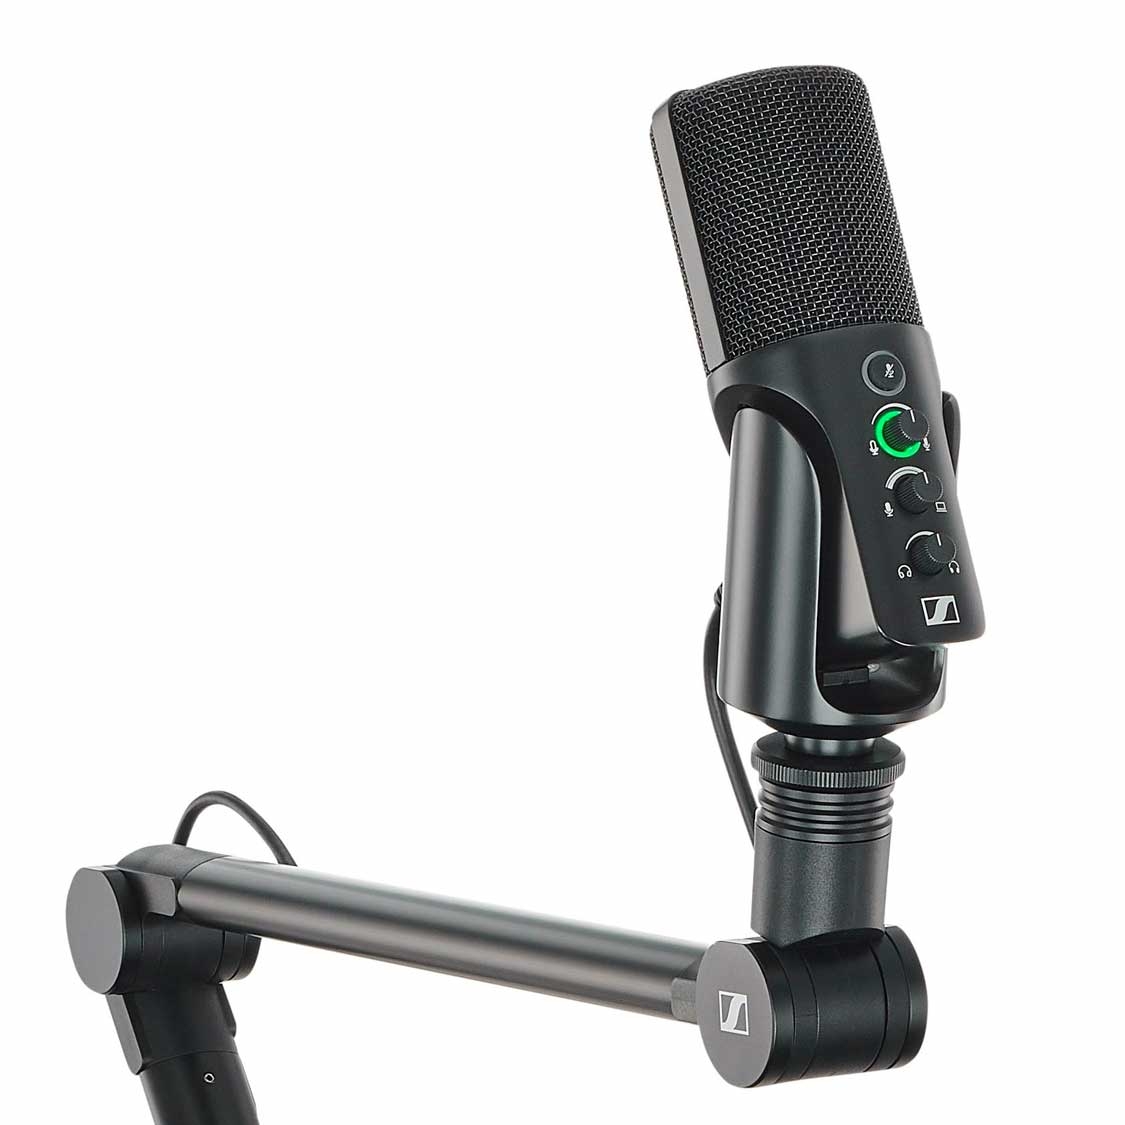 Sennheiser Professional Profile USB Microphone Streaming Set with Boom Arm,  3 m USB-C Cable & Mic Pouch